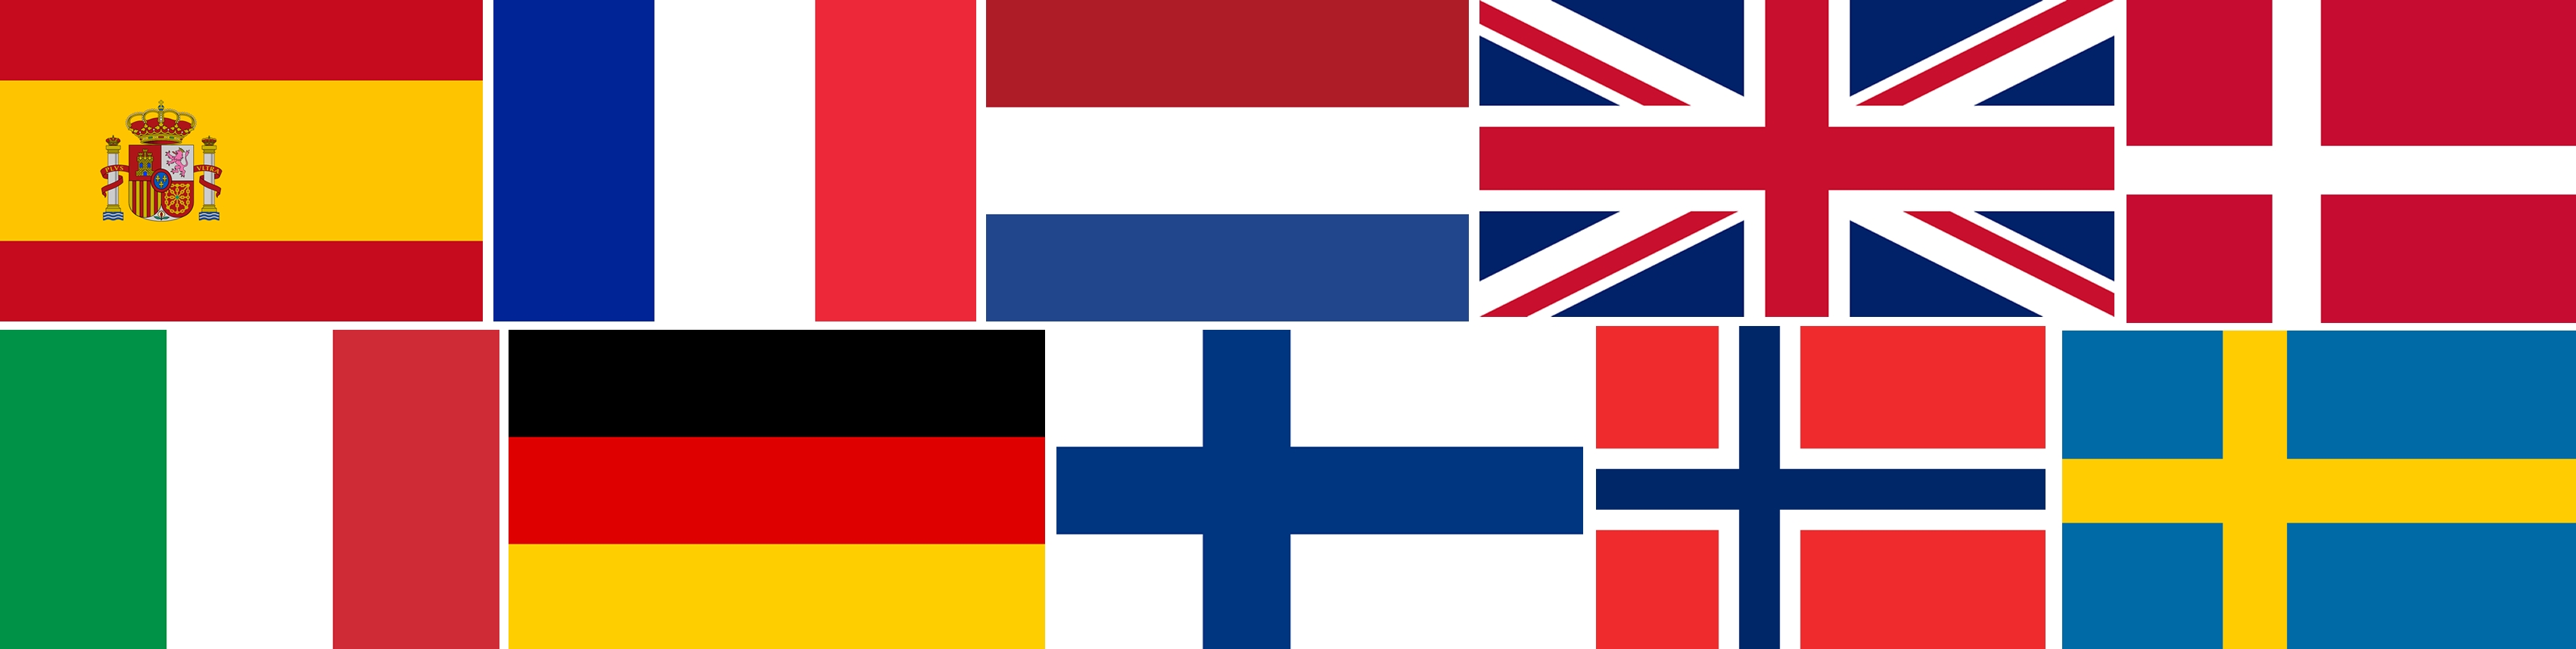 StagePool Language Flags